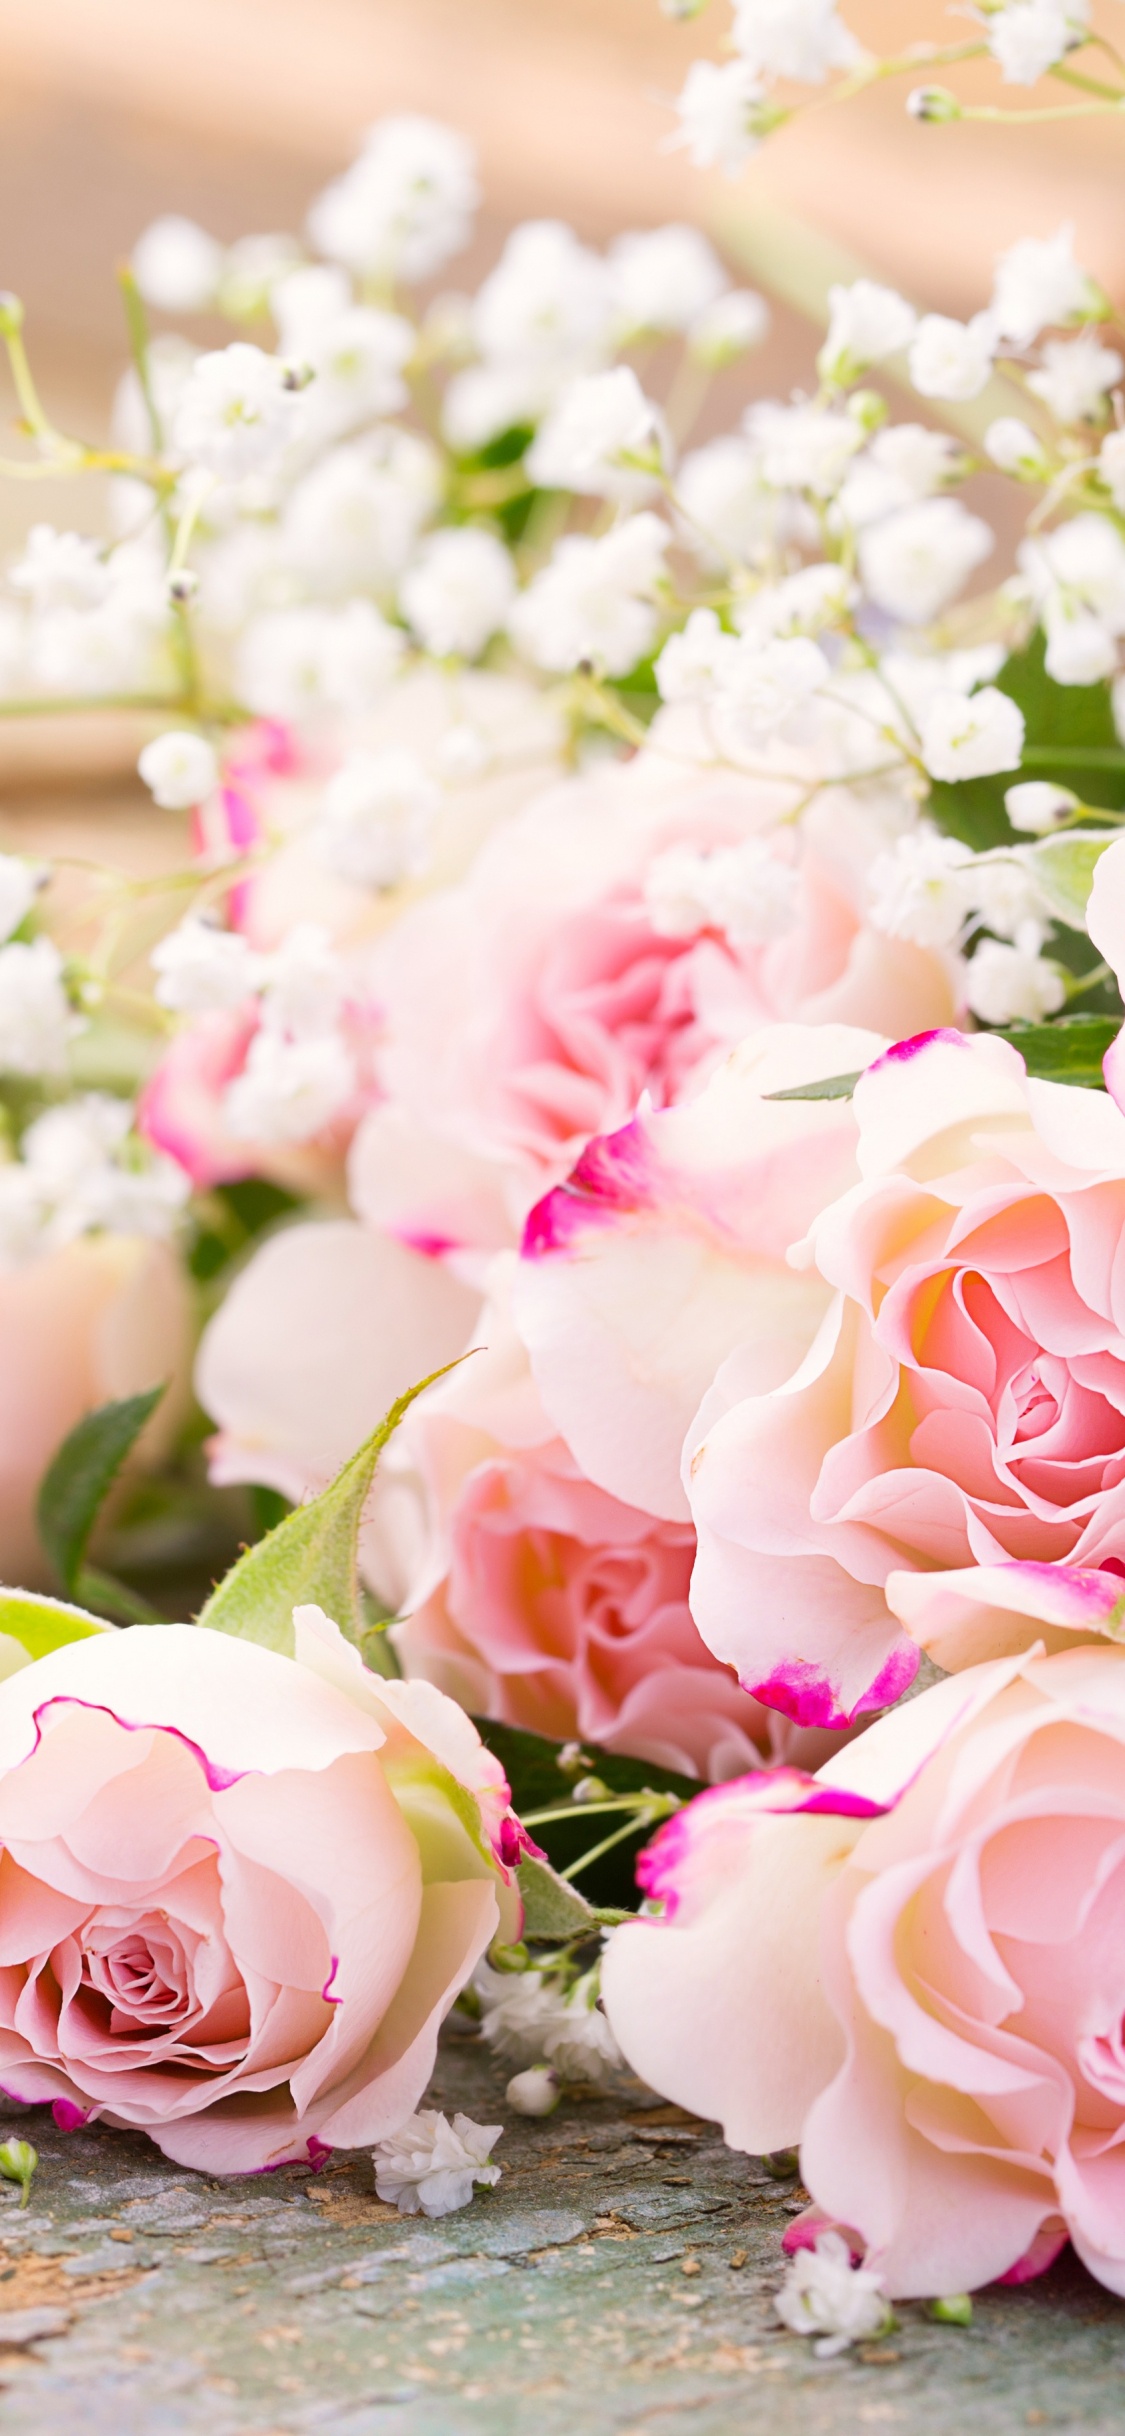 Bouquet de Roses Roses et Blanches. Wallpaper in 1125x2436 Resolution